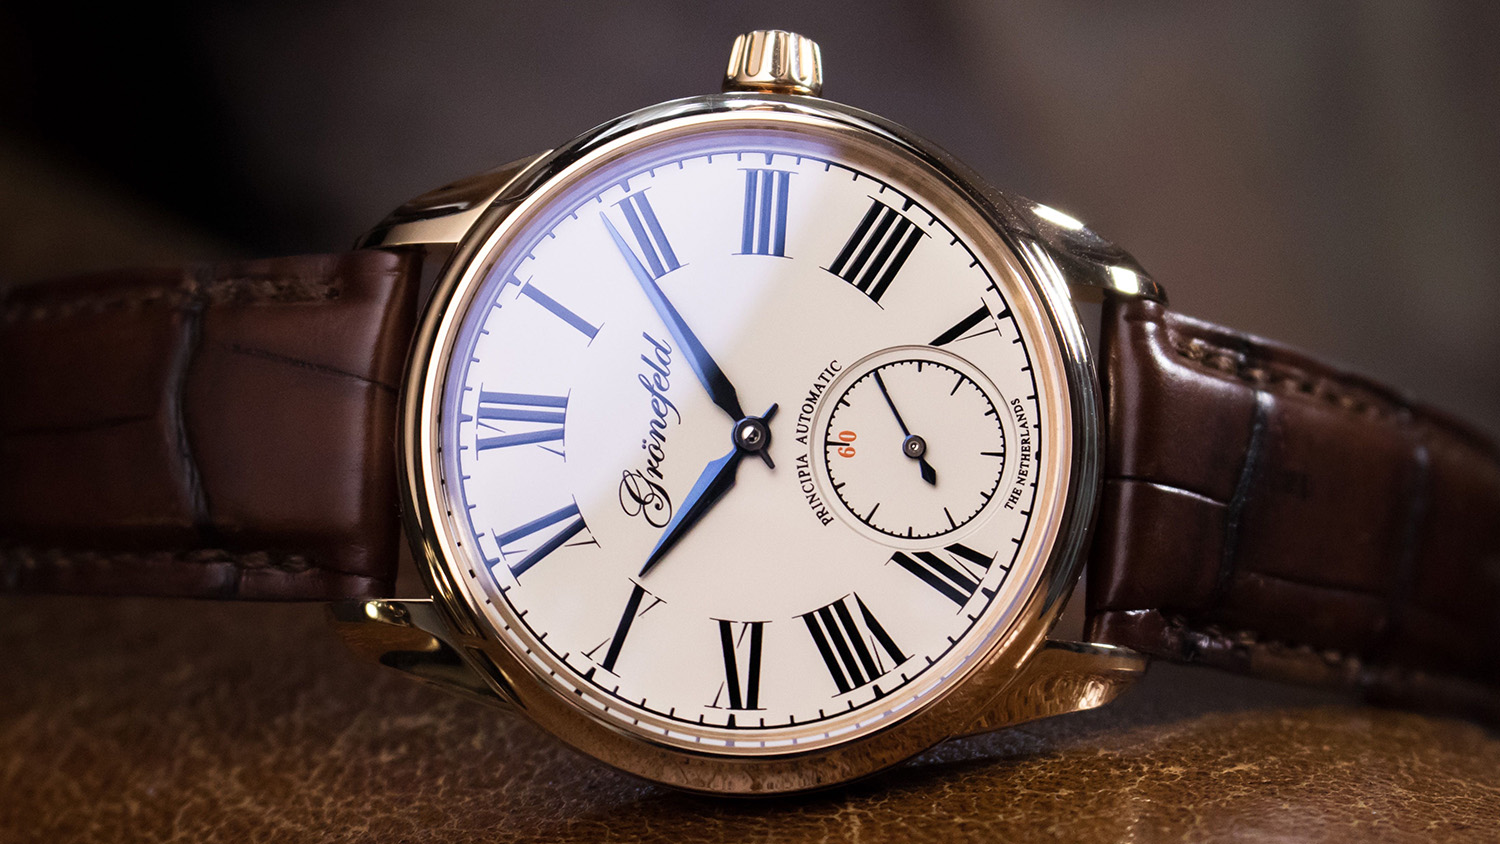 Grönefeld Introduces Its First Automatic Movement